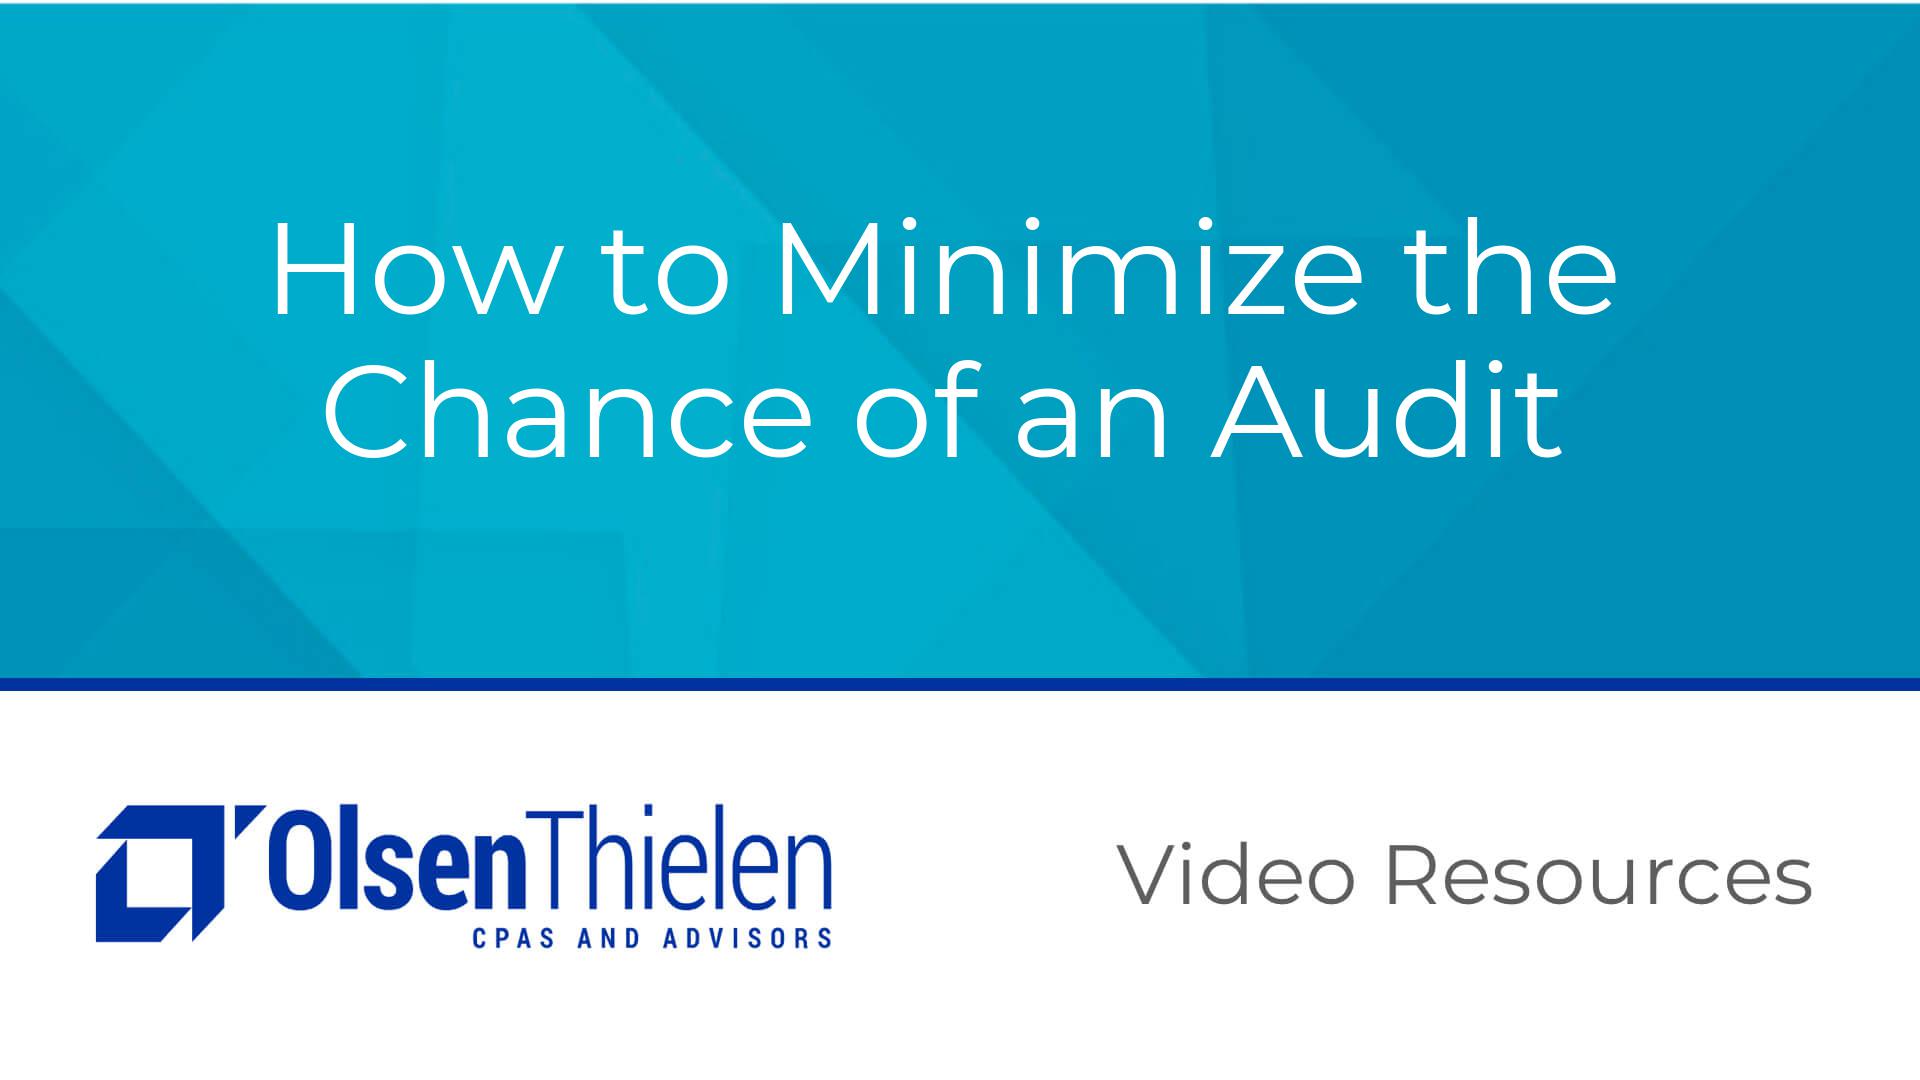 How to Minimize the Chance of an Audit